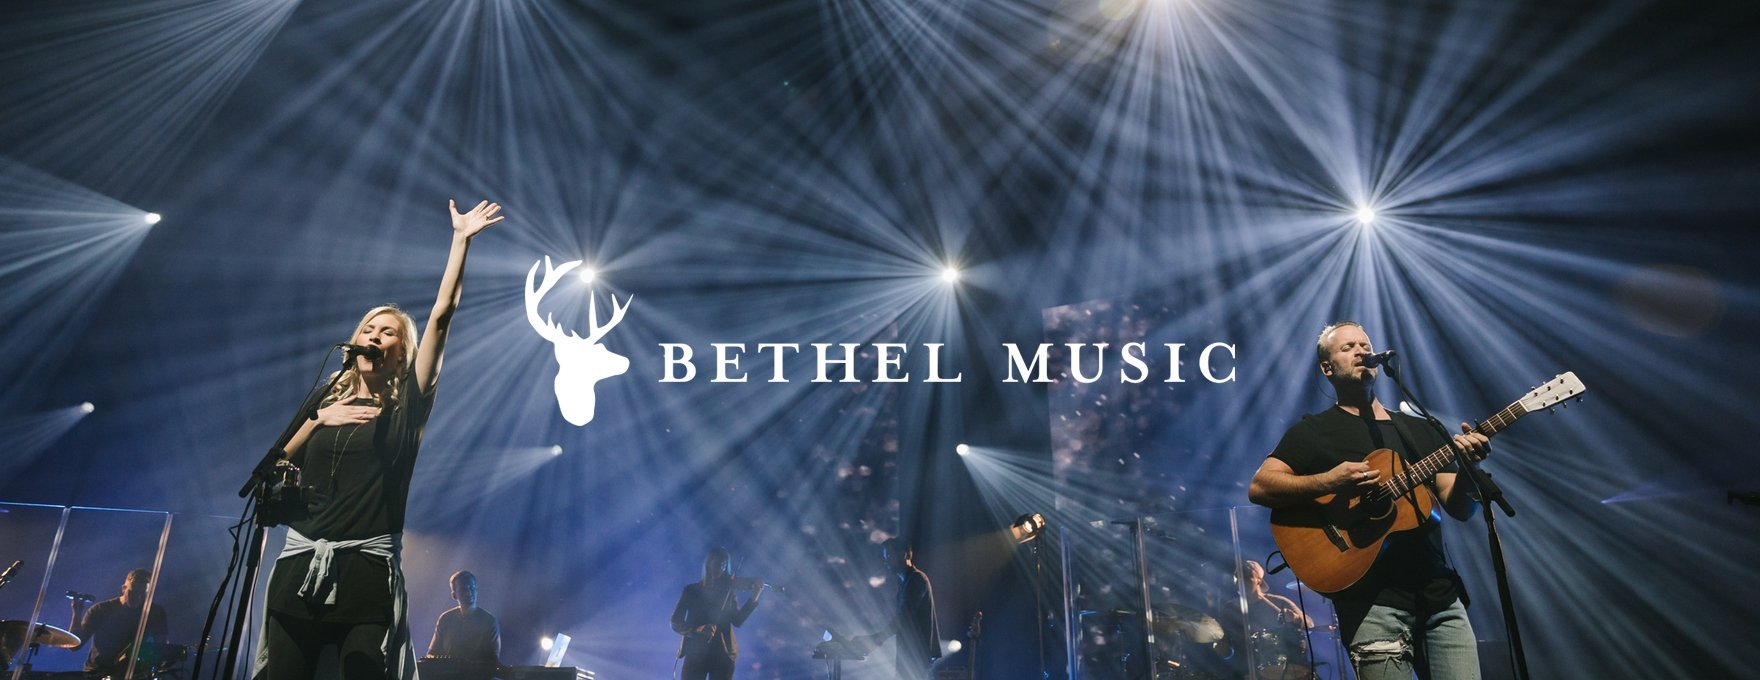 Our church sings worship songs from Bethel, Hillsong, and Elevation. Here’s why.